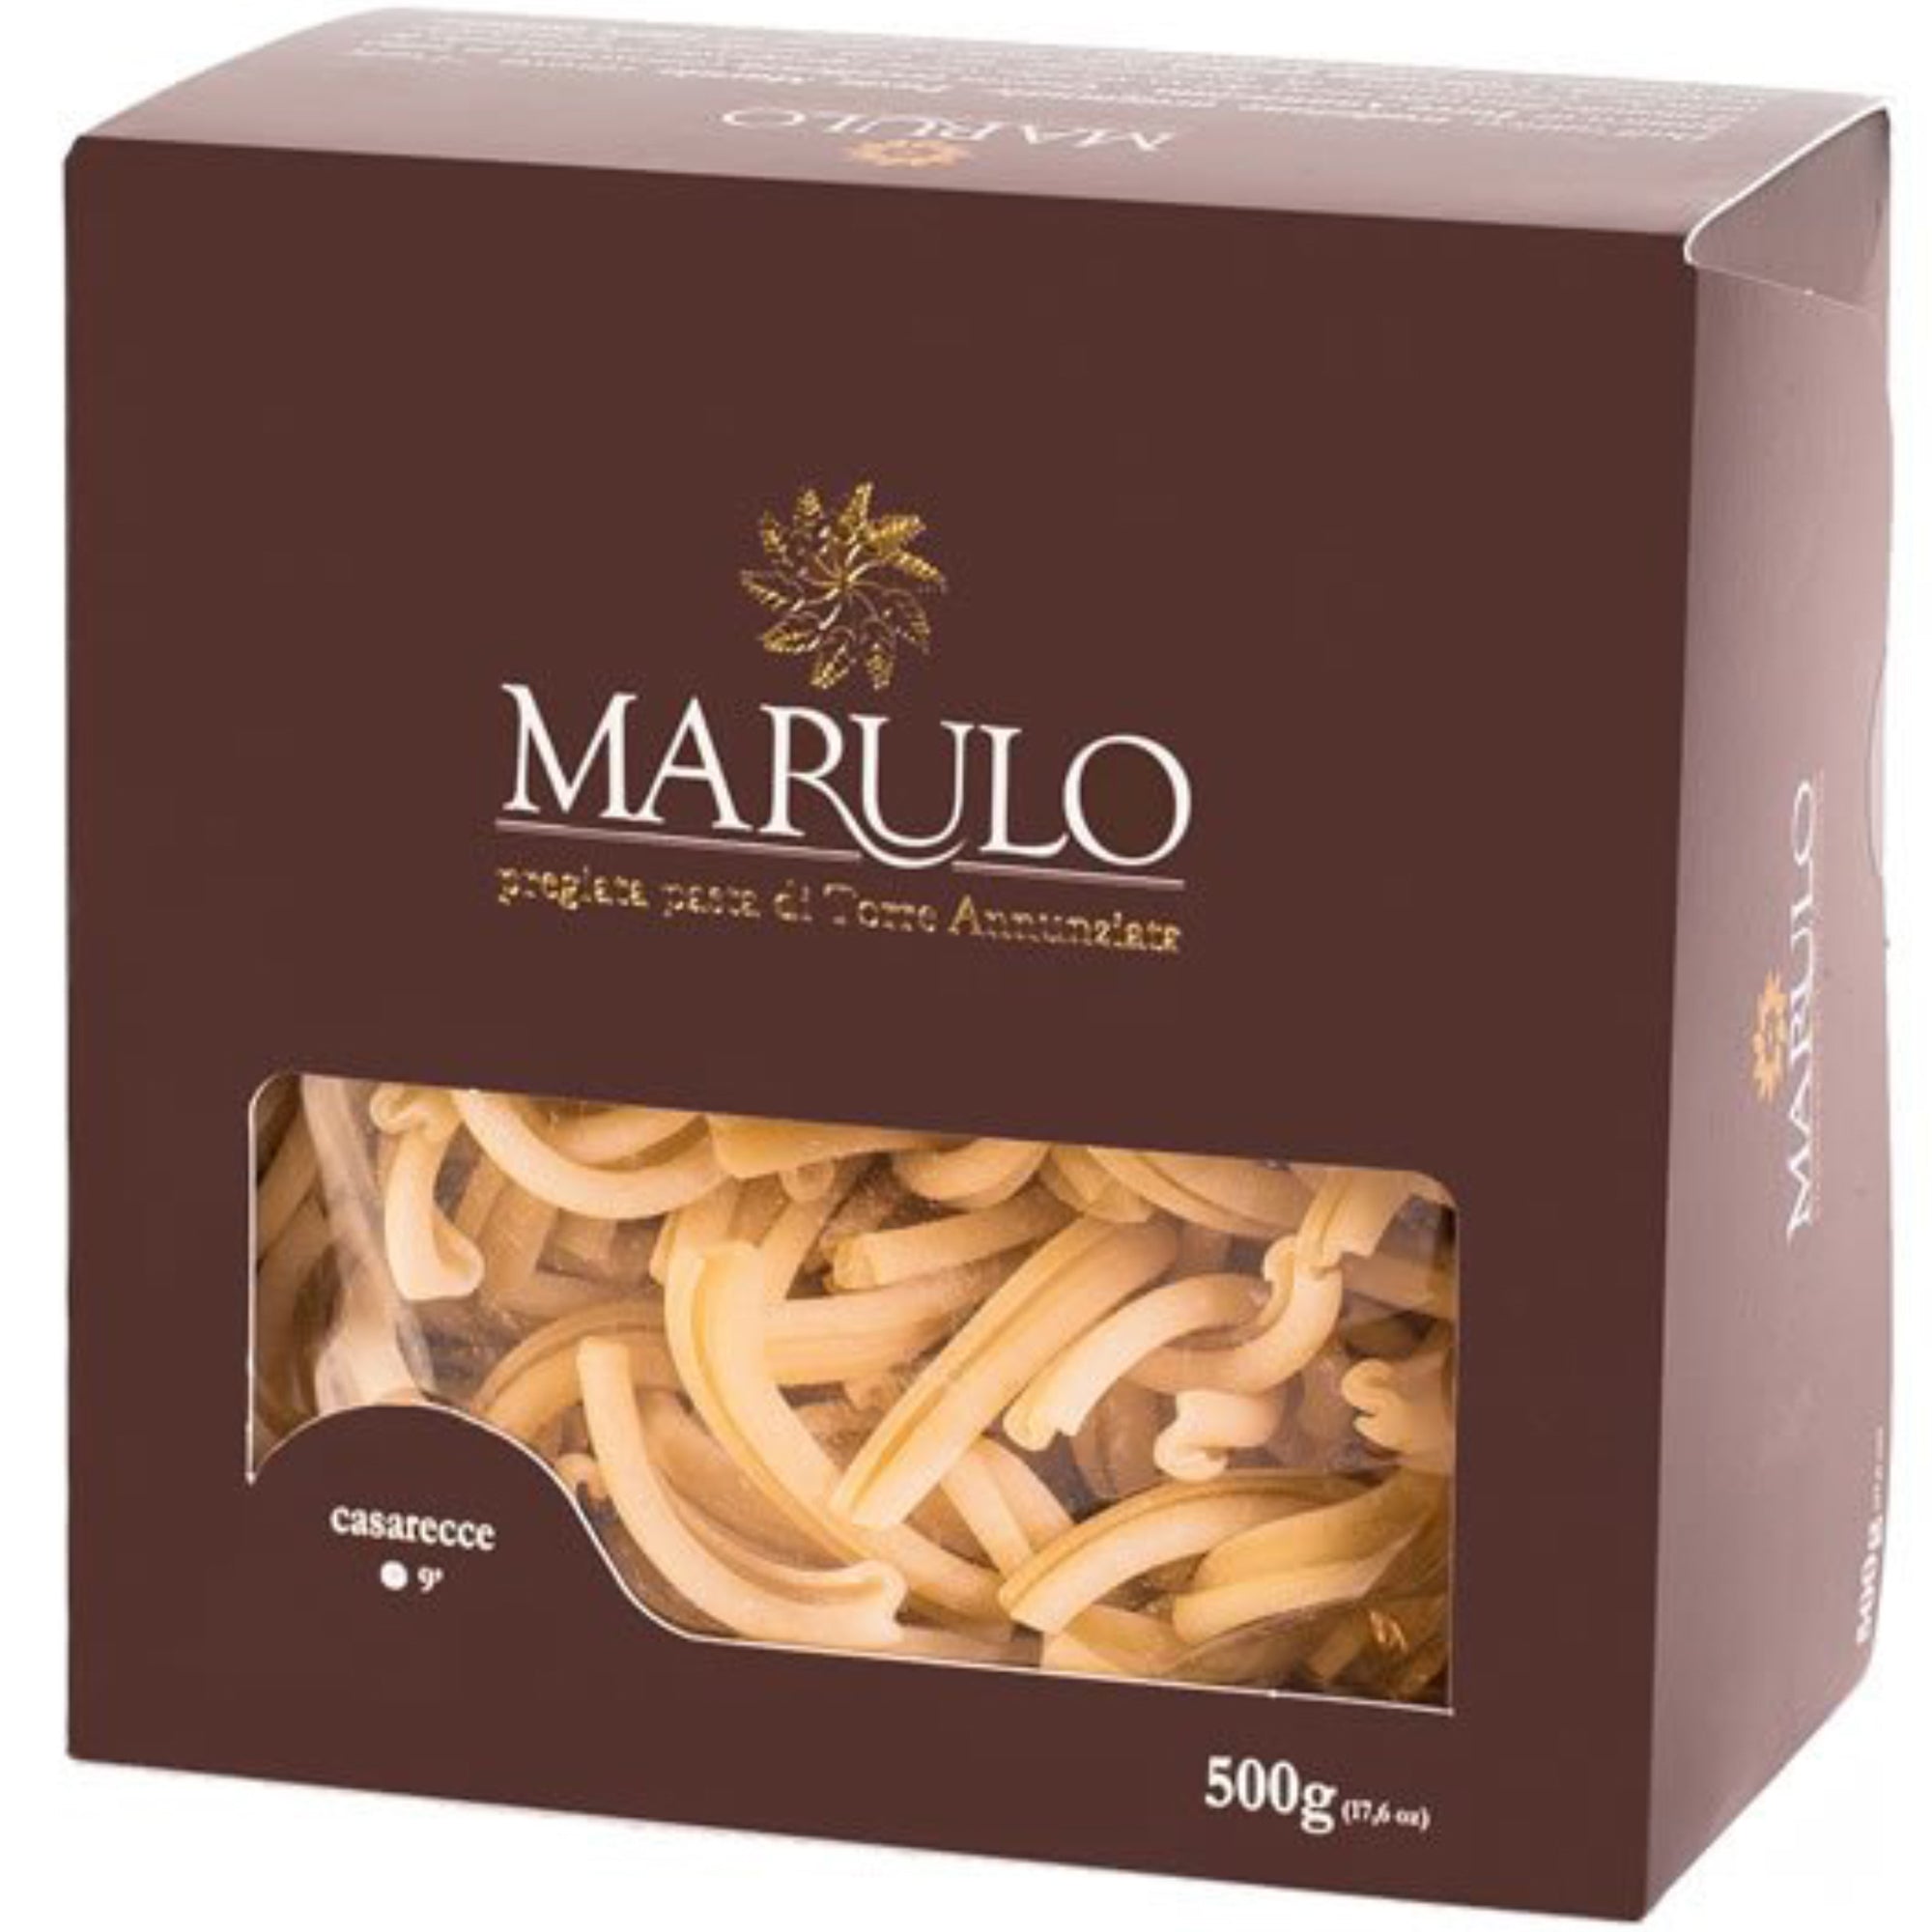 casarecce pasta Marulo Artisan Pasta Spaguetti Bucatini Penne PAsta Calamata Bronze Cut imported pasta from italy casarecce pasta    WholesaleItalianFood.com is pleased to offer  authentic Marulo Artisan Pasta made from the finest, high-quality ingredients at an affordable price. We are passionate and dedicated to our products, the environment, and providing a fantastic variety of pasta like our delicious Marulo Artisan Pasta.